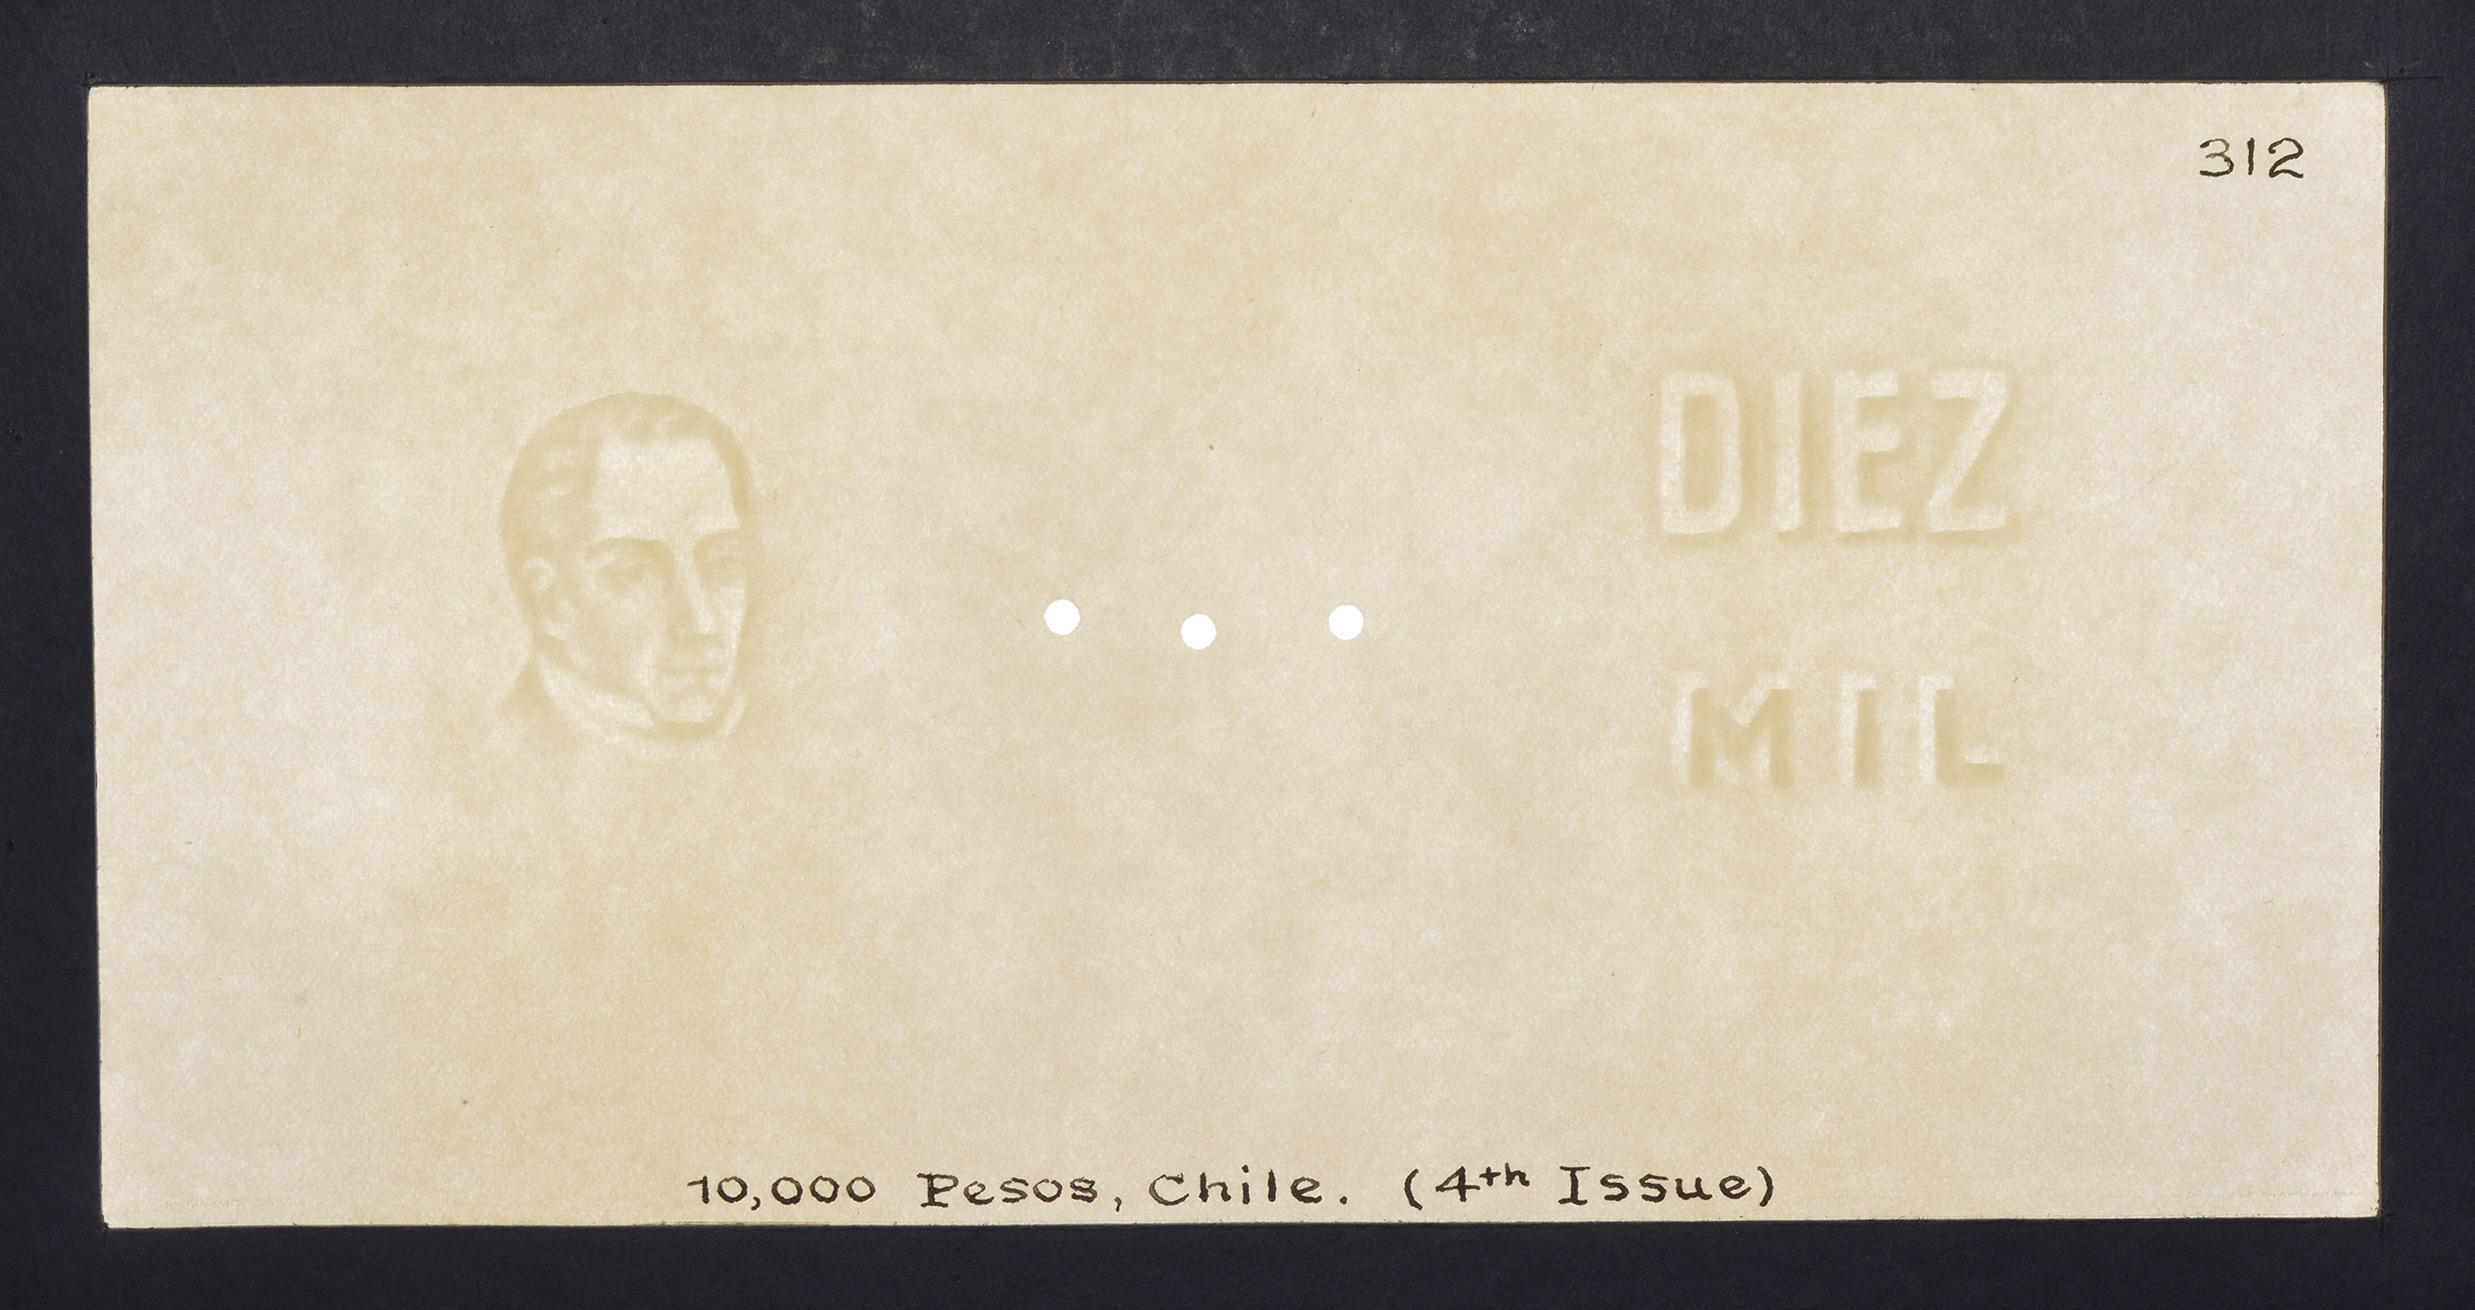 Banco Central de Chile, a complete set of watermarked paper for the 5, 10, 20, 50, 100,... - Image 2 of 9